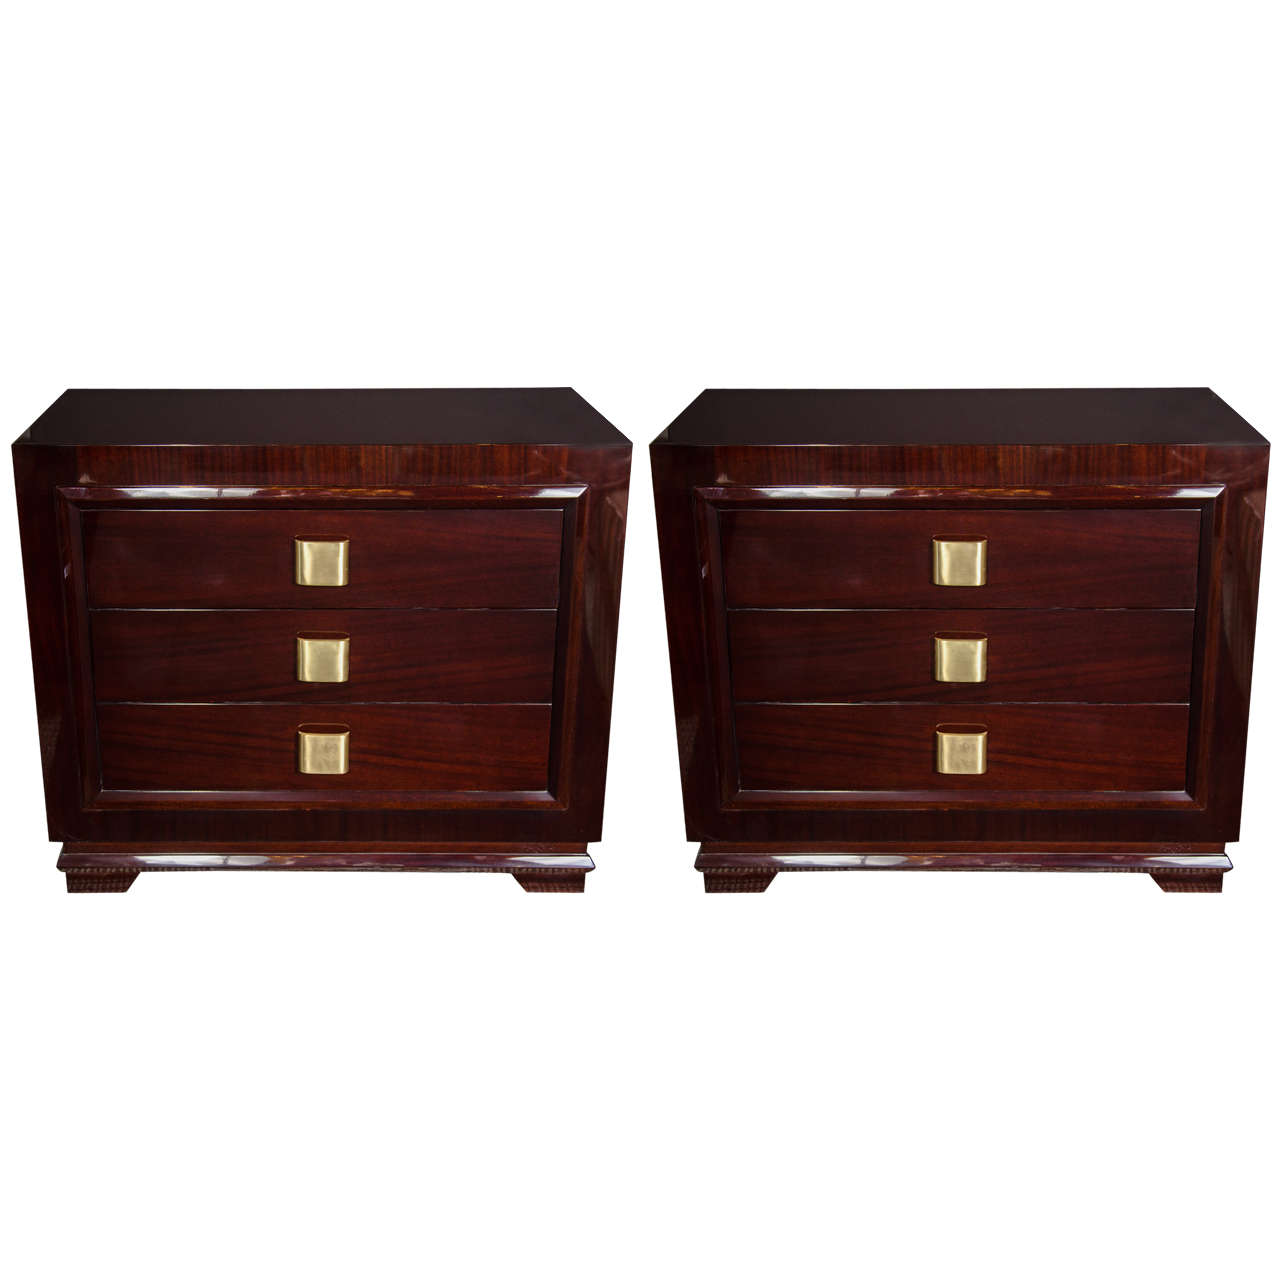 Pair of Outstanding Mid-Century Modern Chests with Brushed Brass Pulls